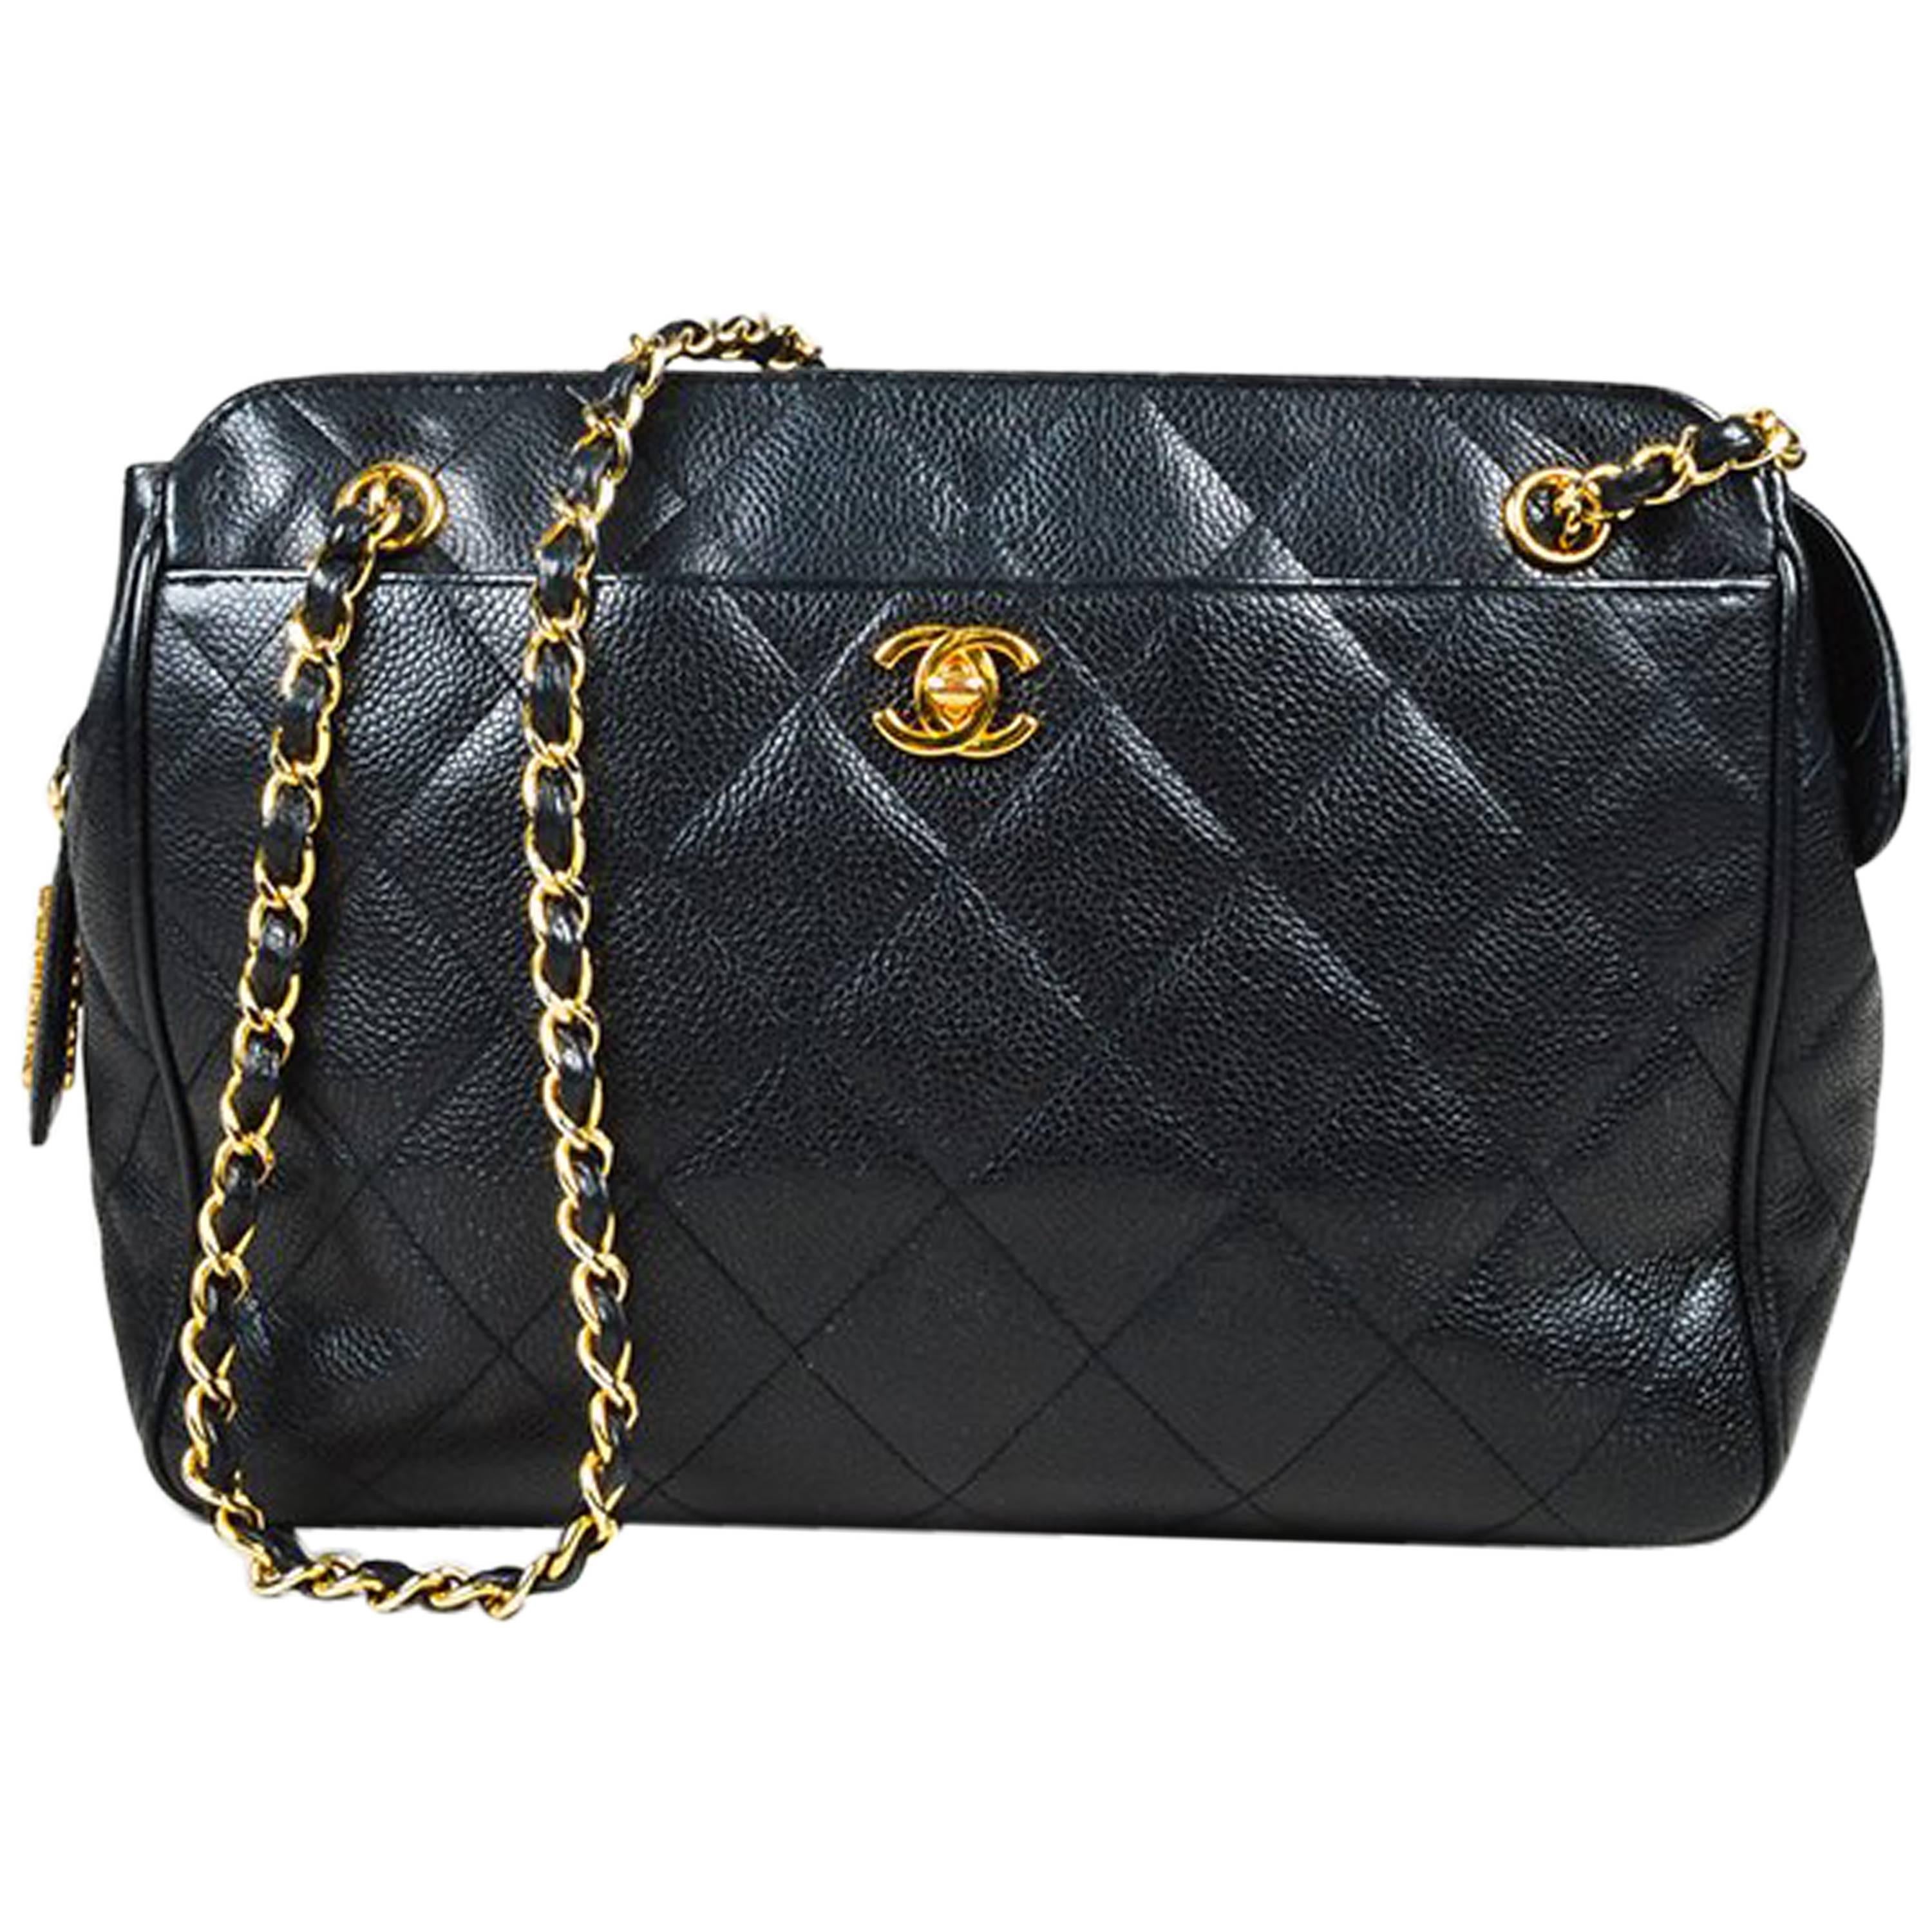 Vintage Chanel Black Caviar Leather Quilted 'CC' Turnlock Accent Bag For Sale